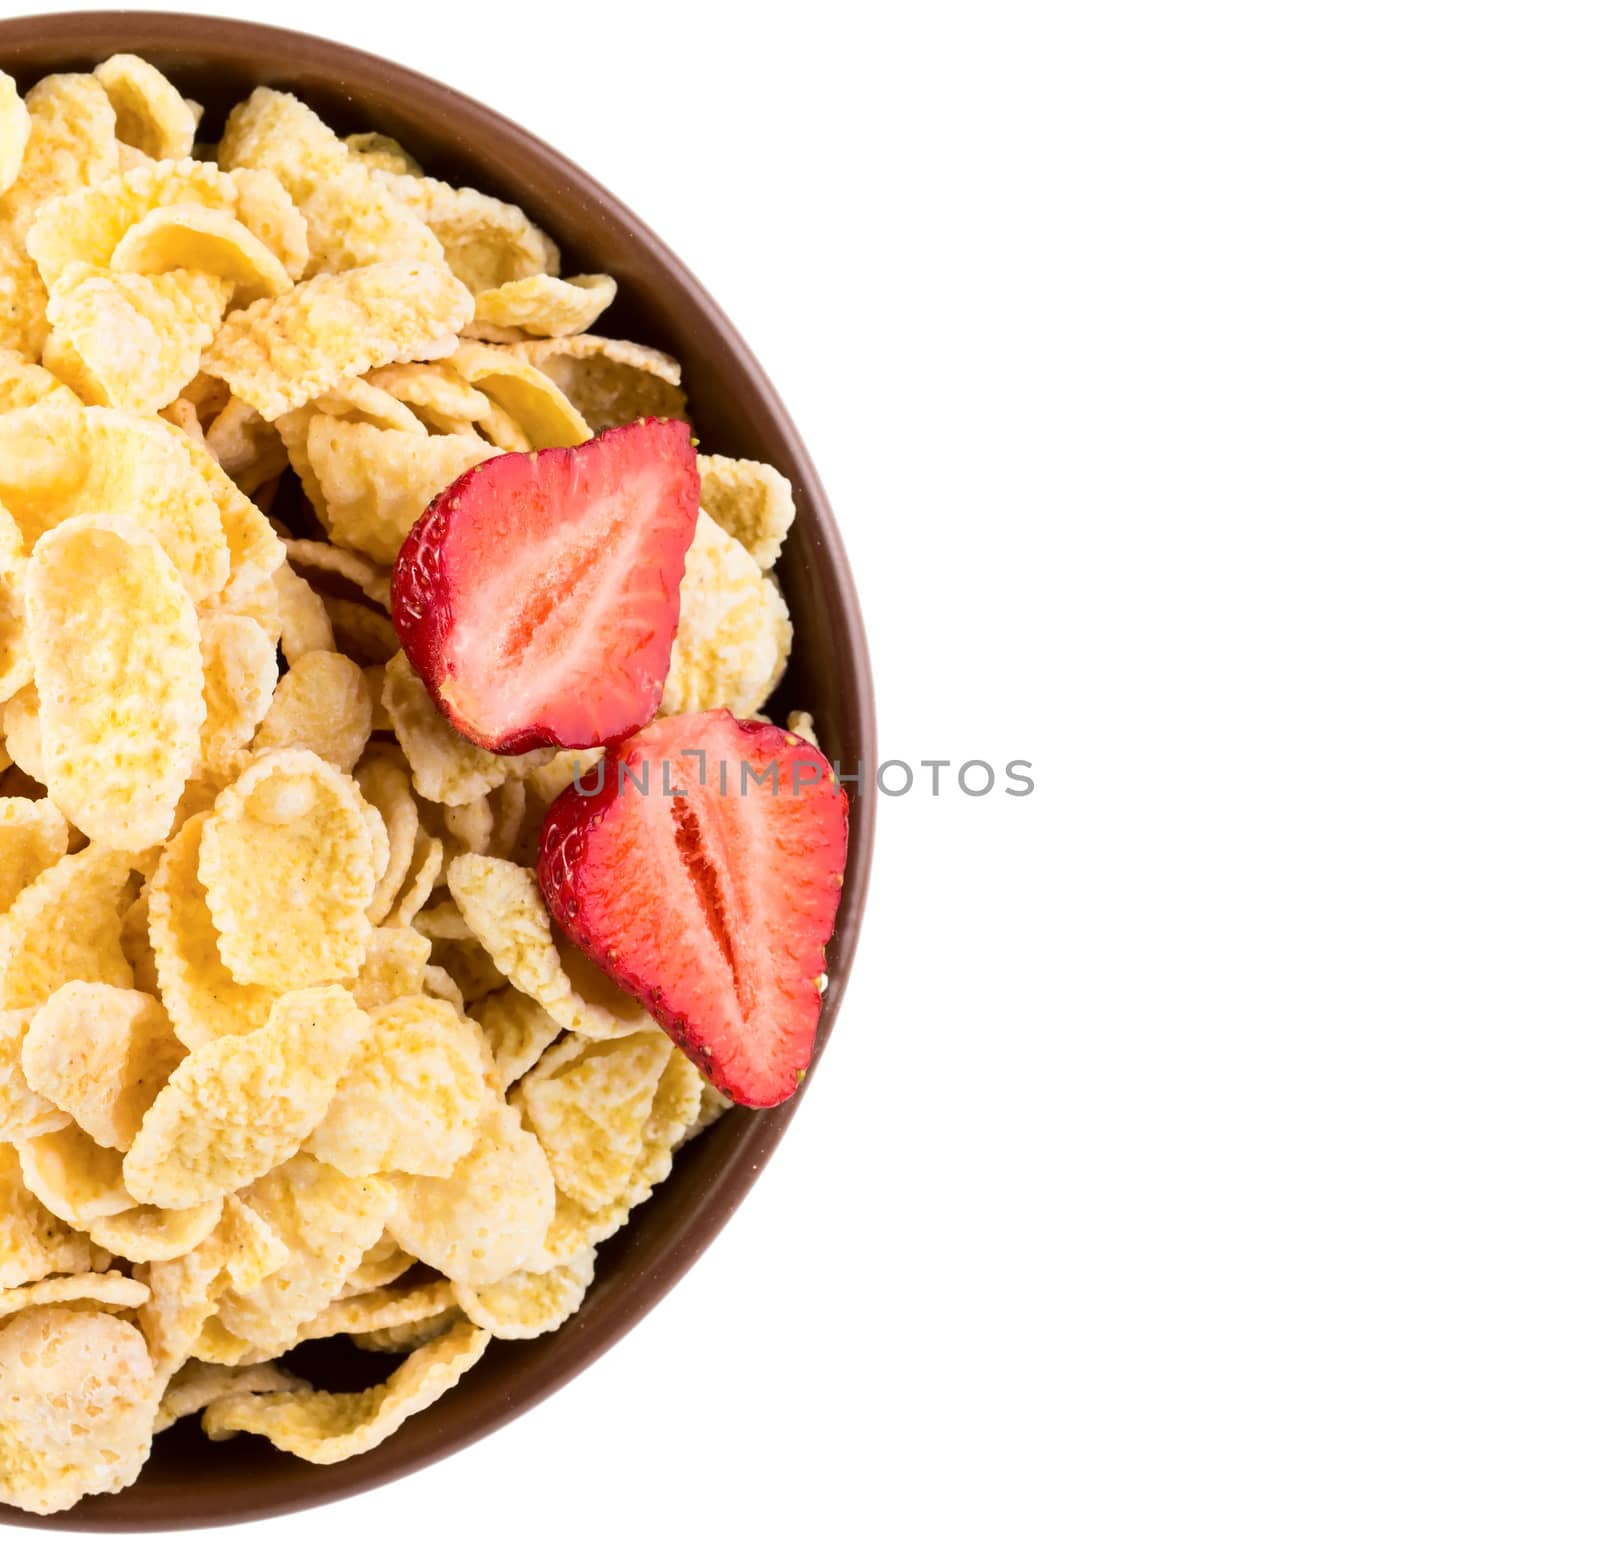 Cornflakes with strawberries on bowl by Valengilda